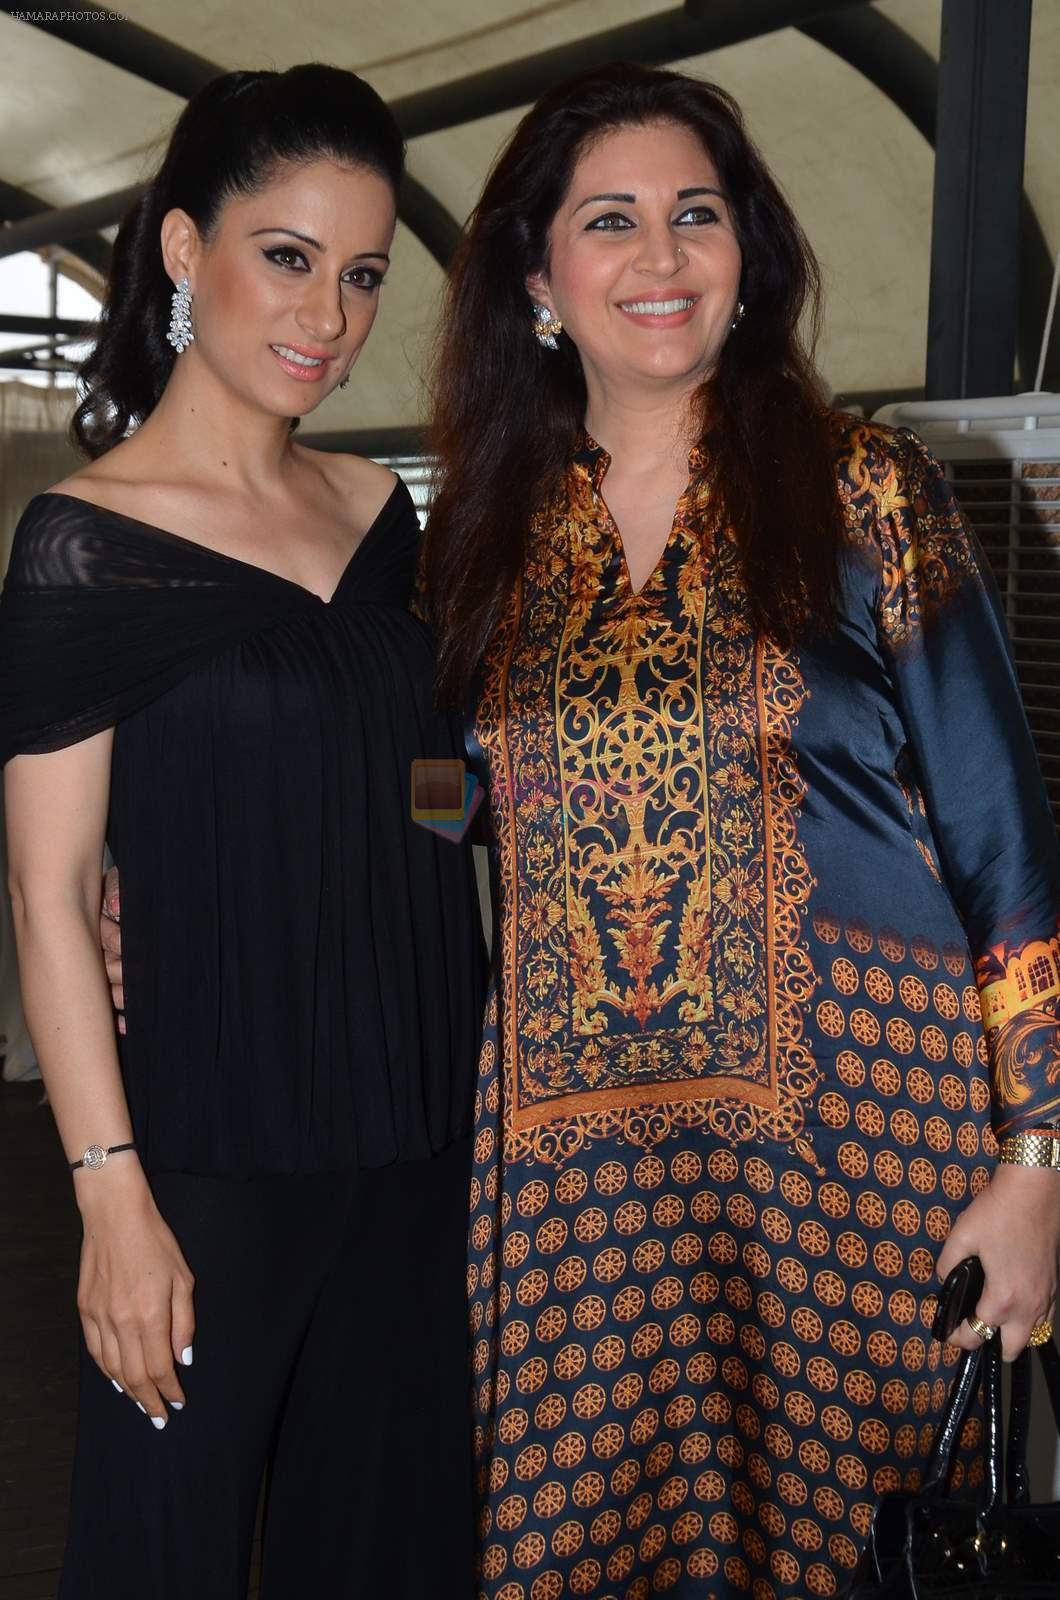 Rouble Nagi attend brunch in Mumbai on 8th July 2015